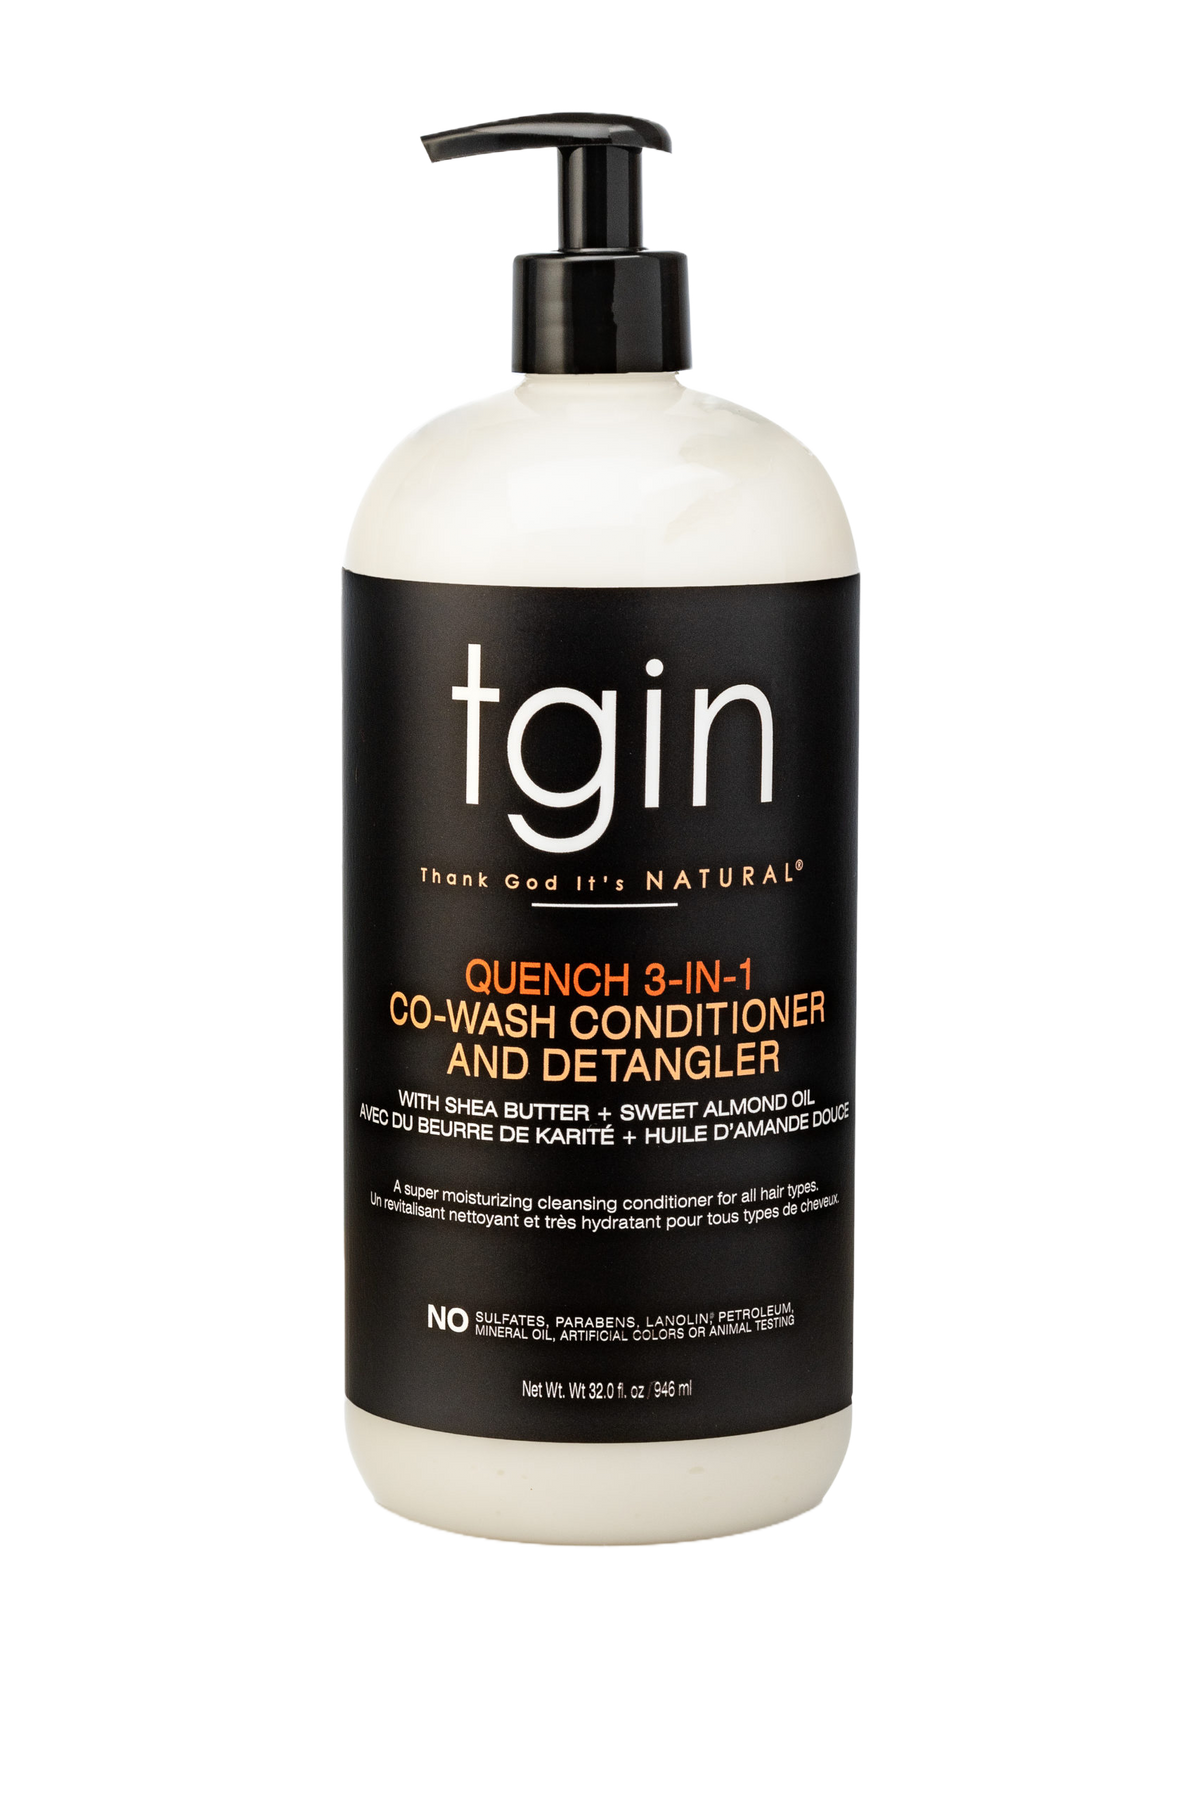 tgin Quench 3-in-1 Co-Wash Conditioner and Detangler 13oz